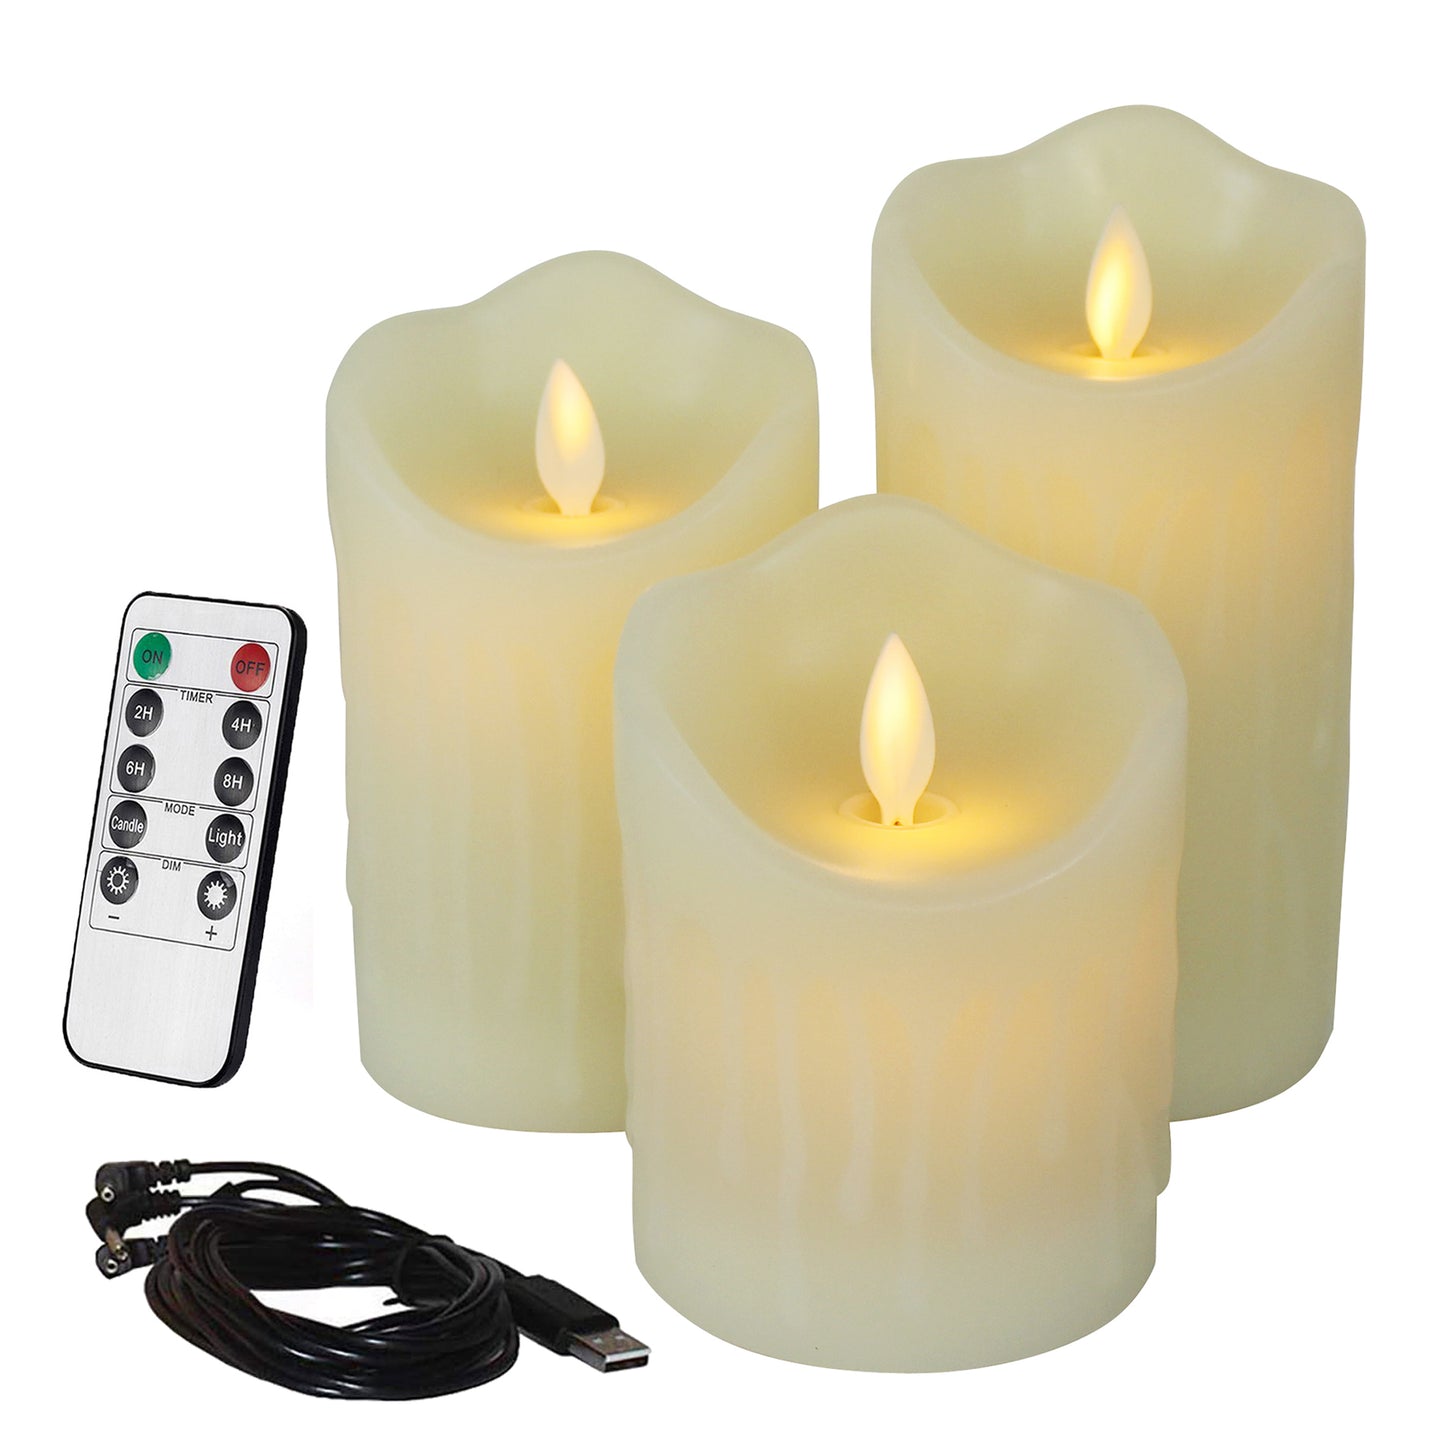 CVHOMEDECO. Flameless Candles Electronic Rechargeable Battery Extra Bright Ivory Dripping Real Wax Pillars LED Flickering Pillar Candle with 10 Key Remote Control, Set of 3